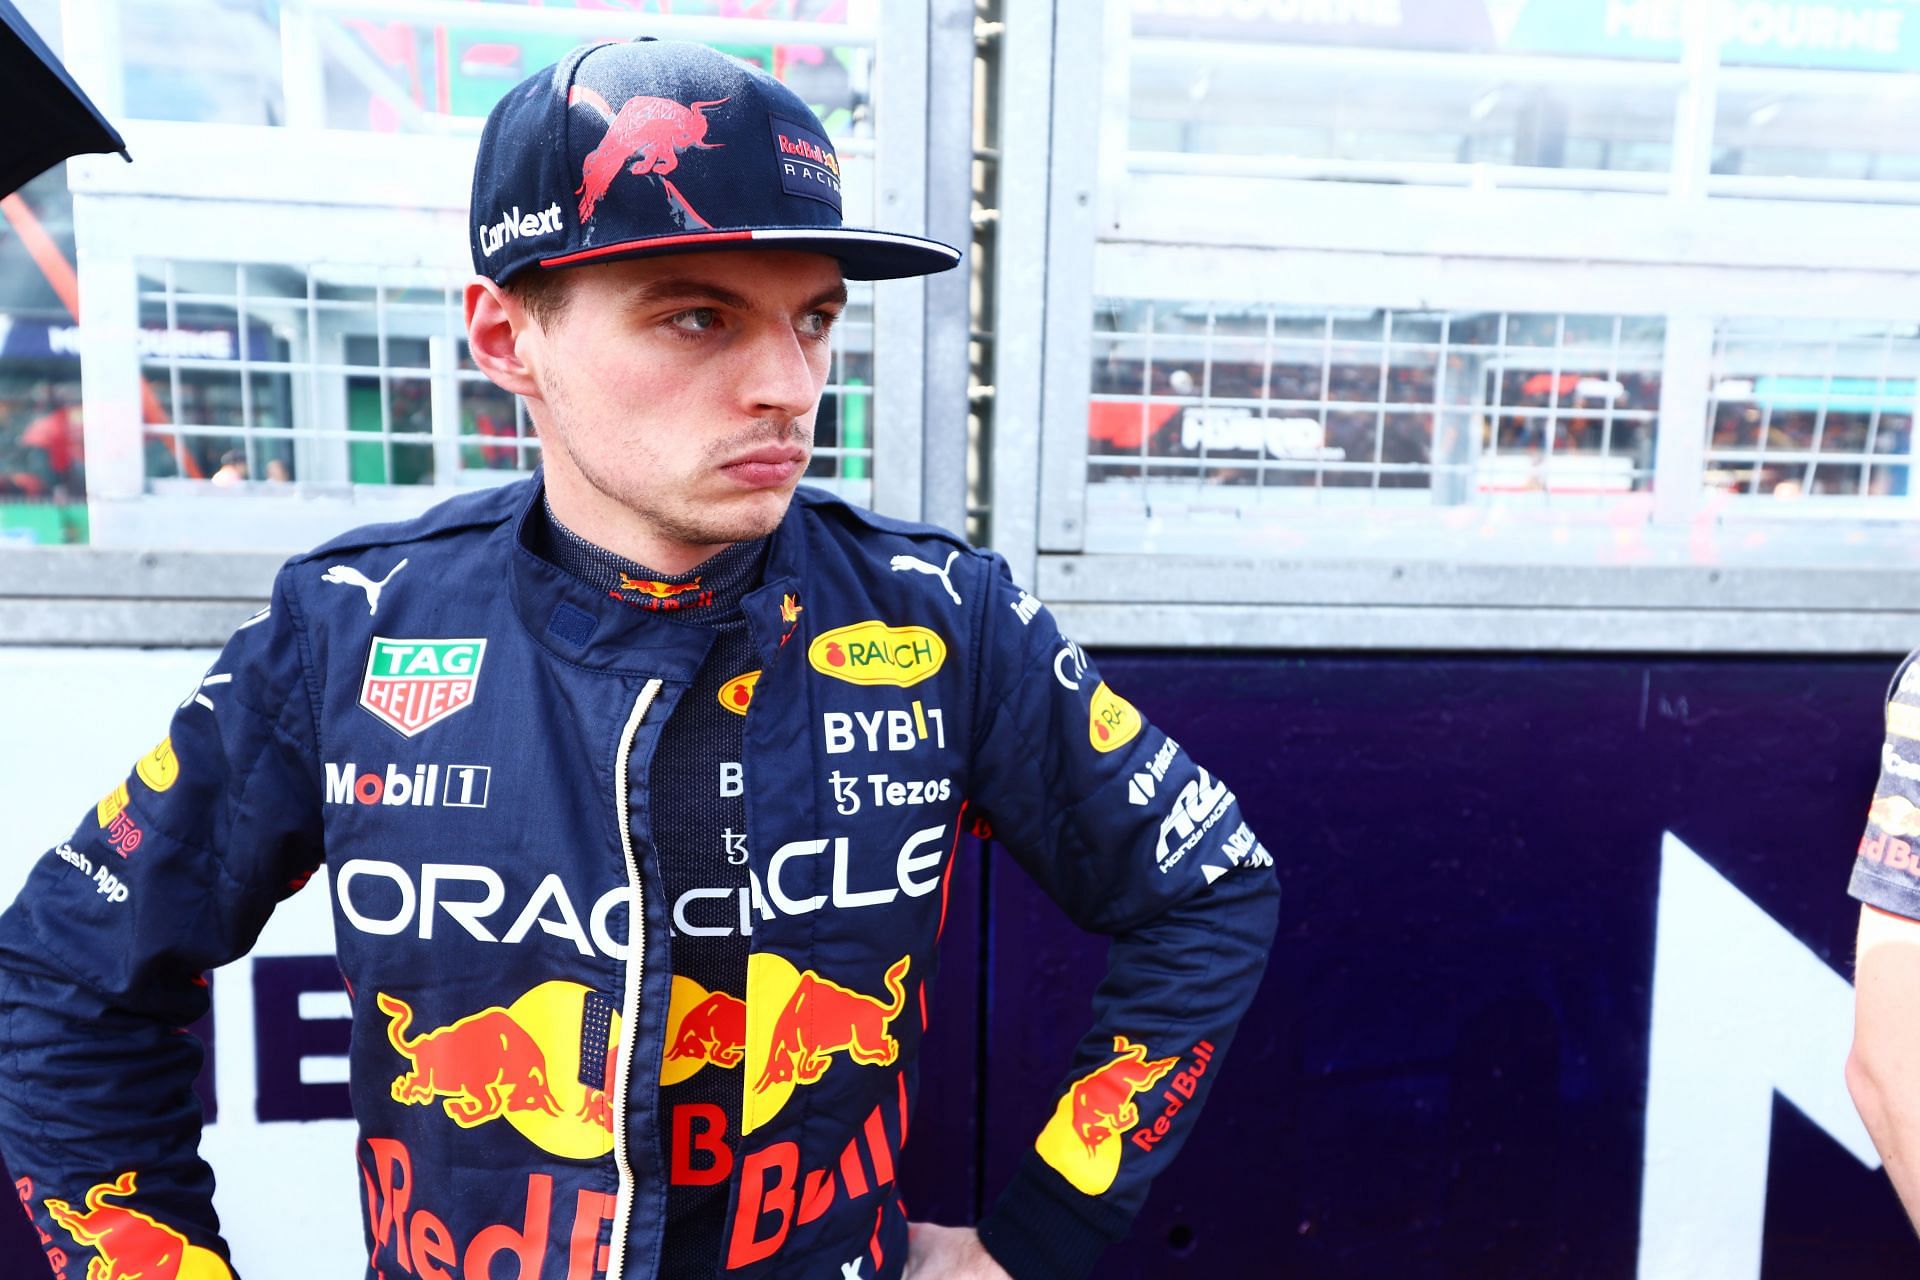 Max Verstappen looks on from the grid before the F1 Grand Prix of Australia (Photo by Mark Thompson/Getty Images)